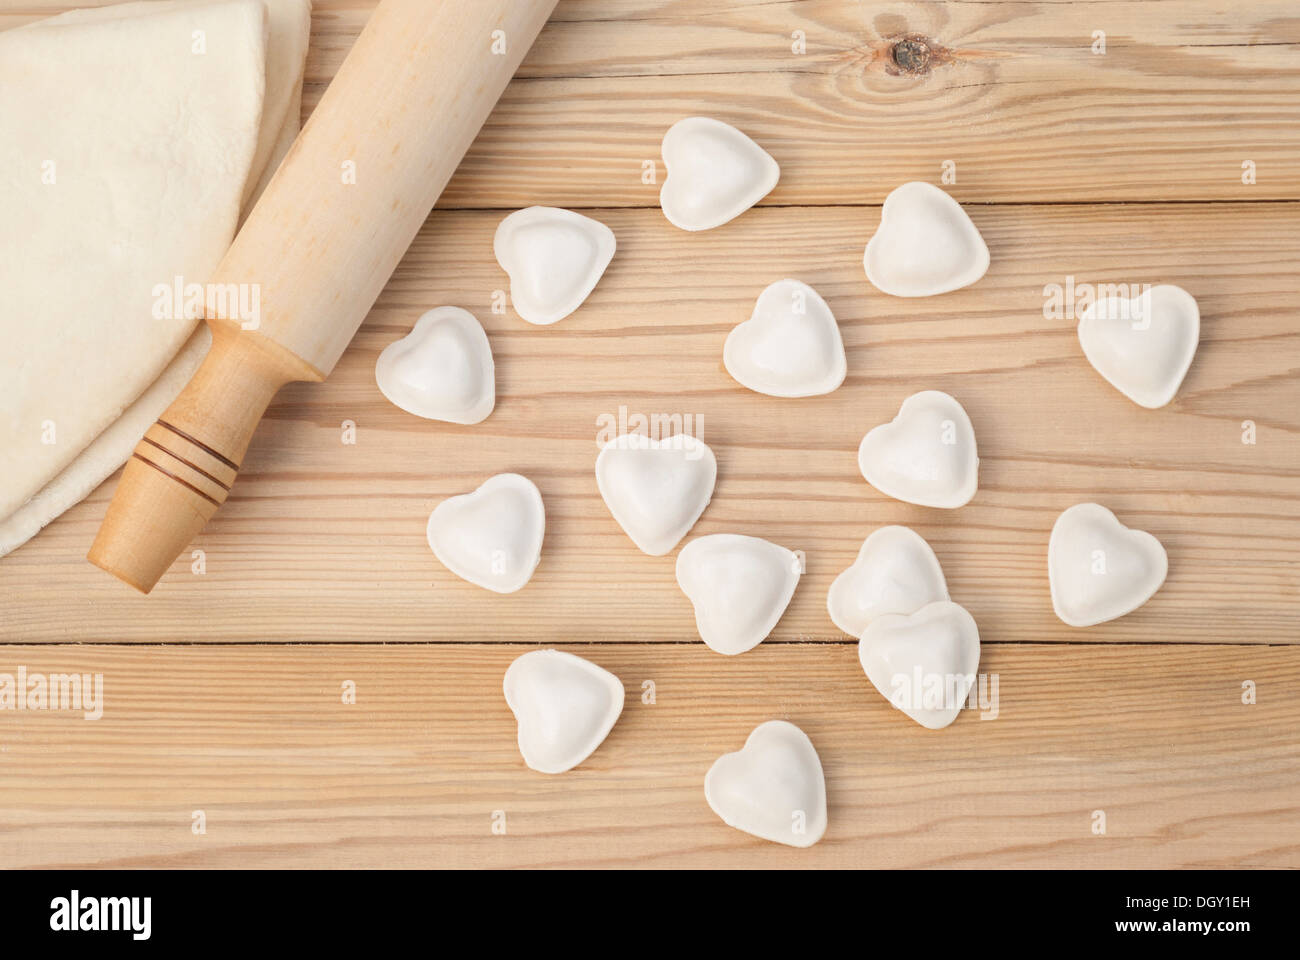 Dumplings in a heart shape dough and rolling pin on the wooden table. Stock Photo